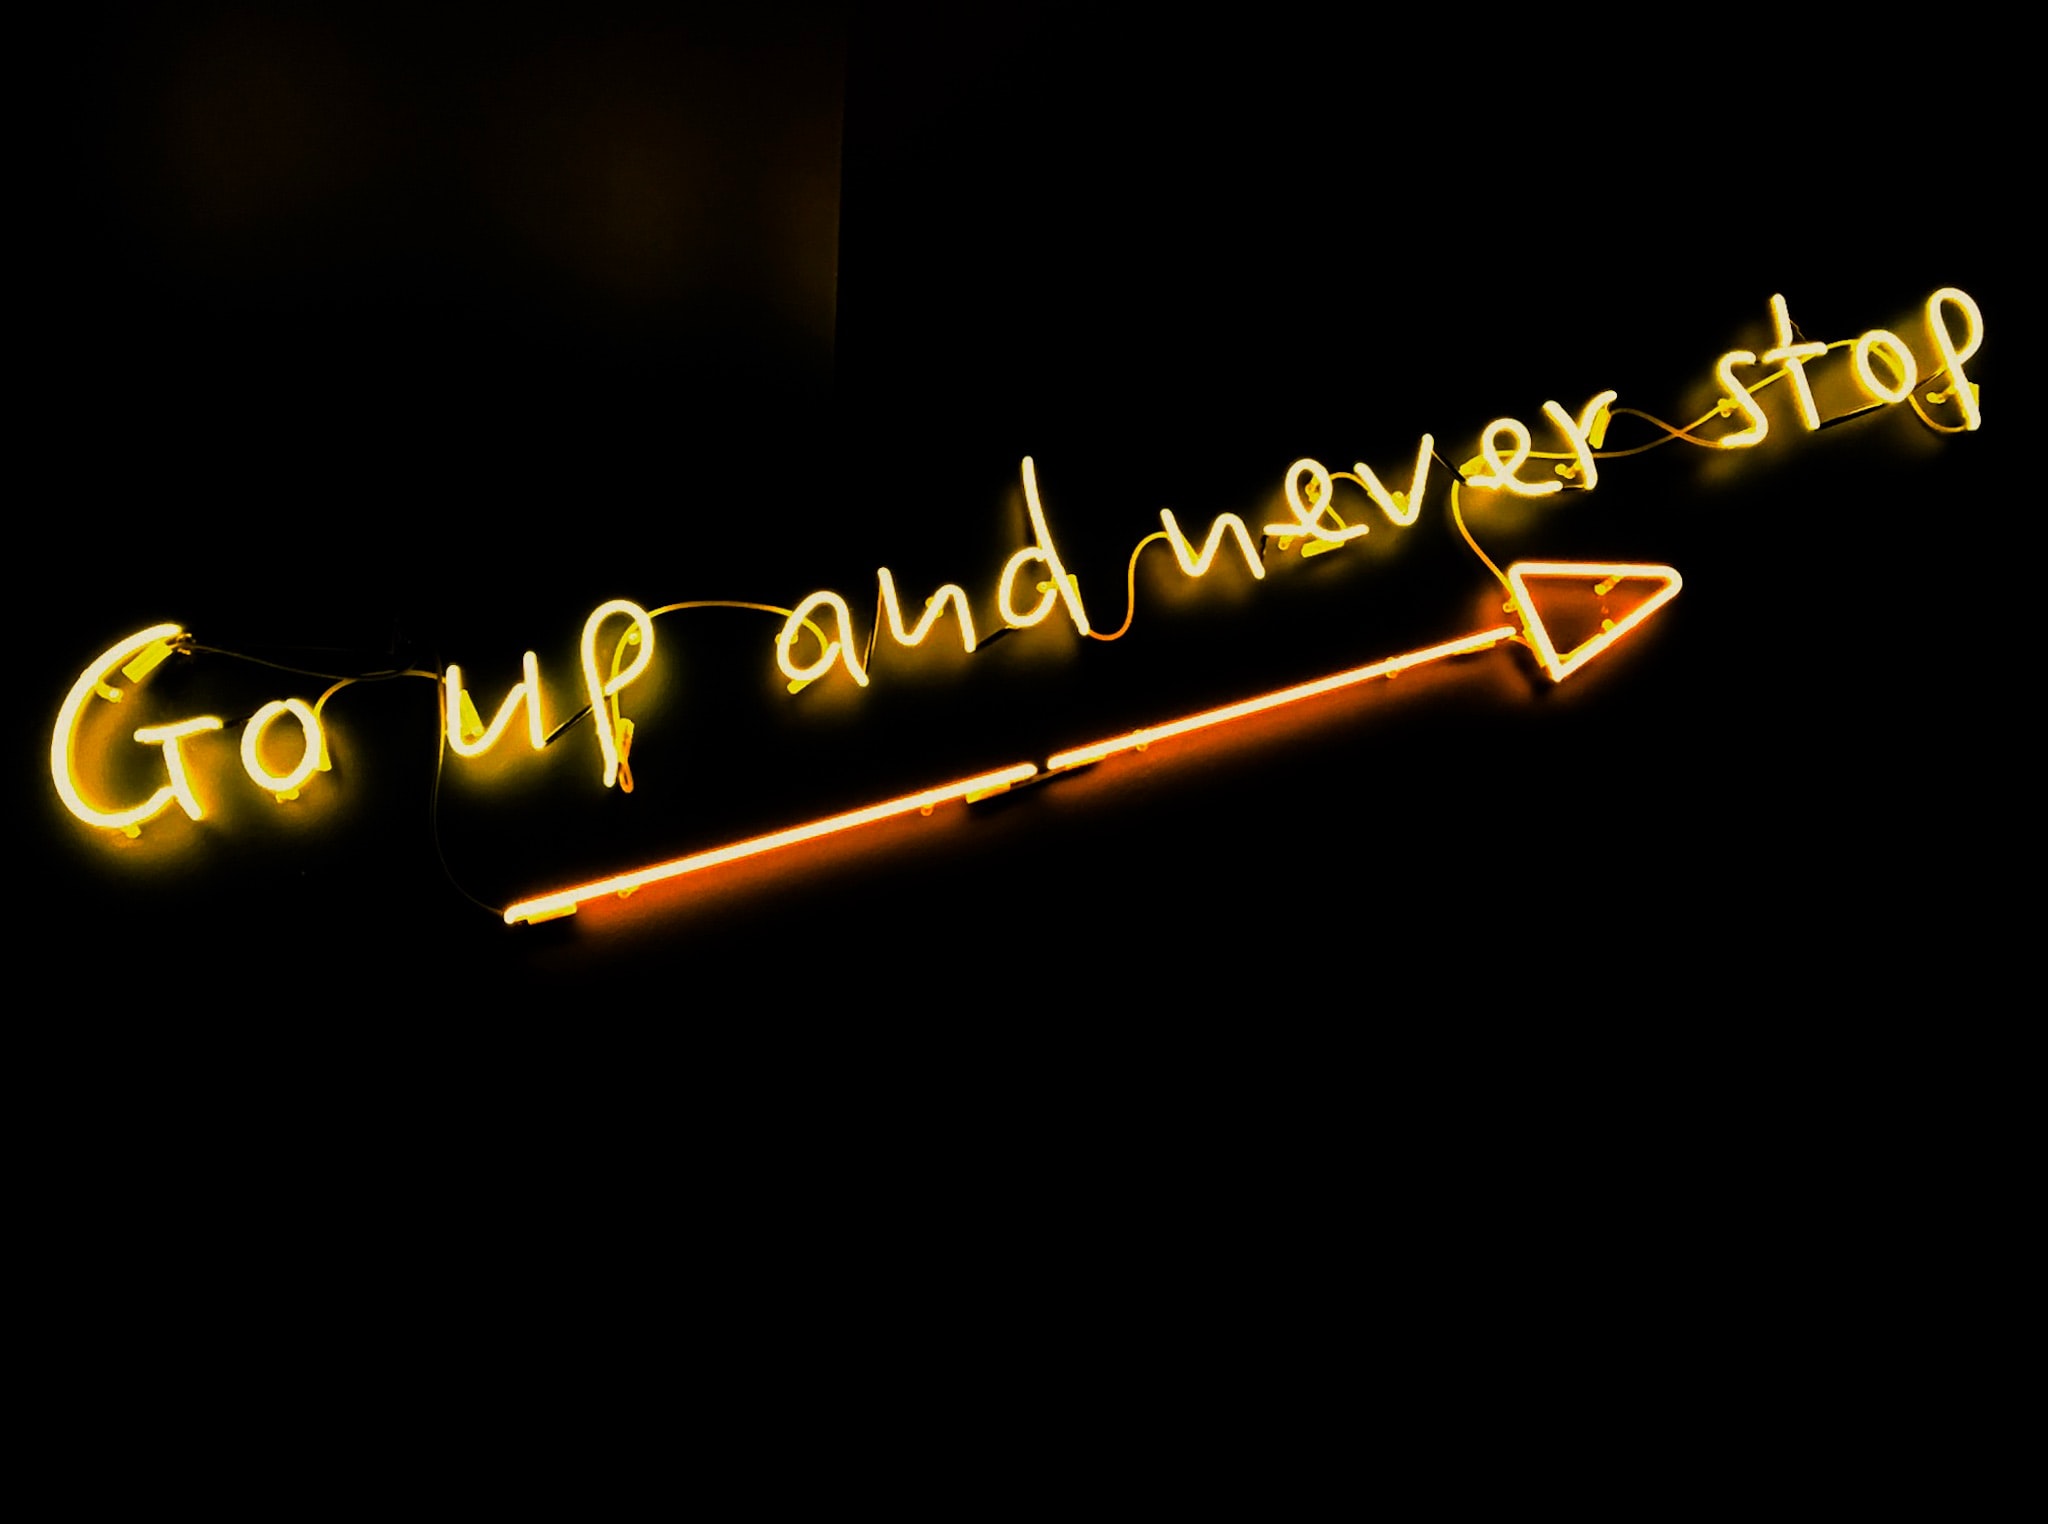 A black background with bright words that say go up and never stop.